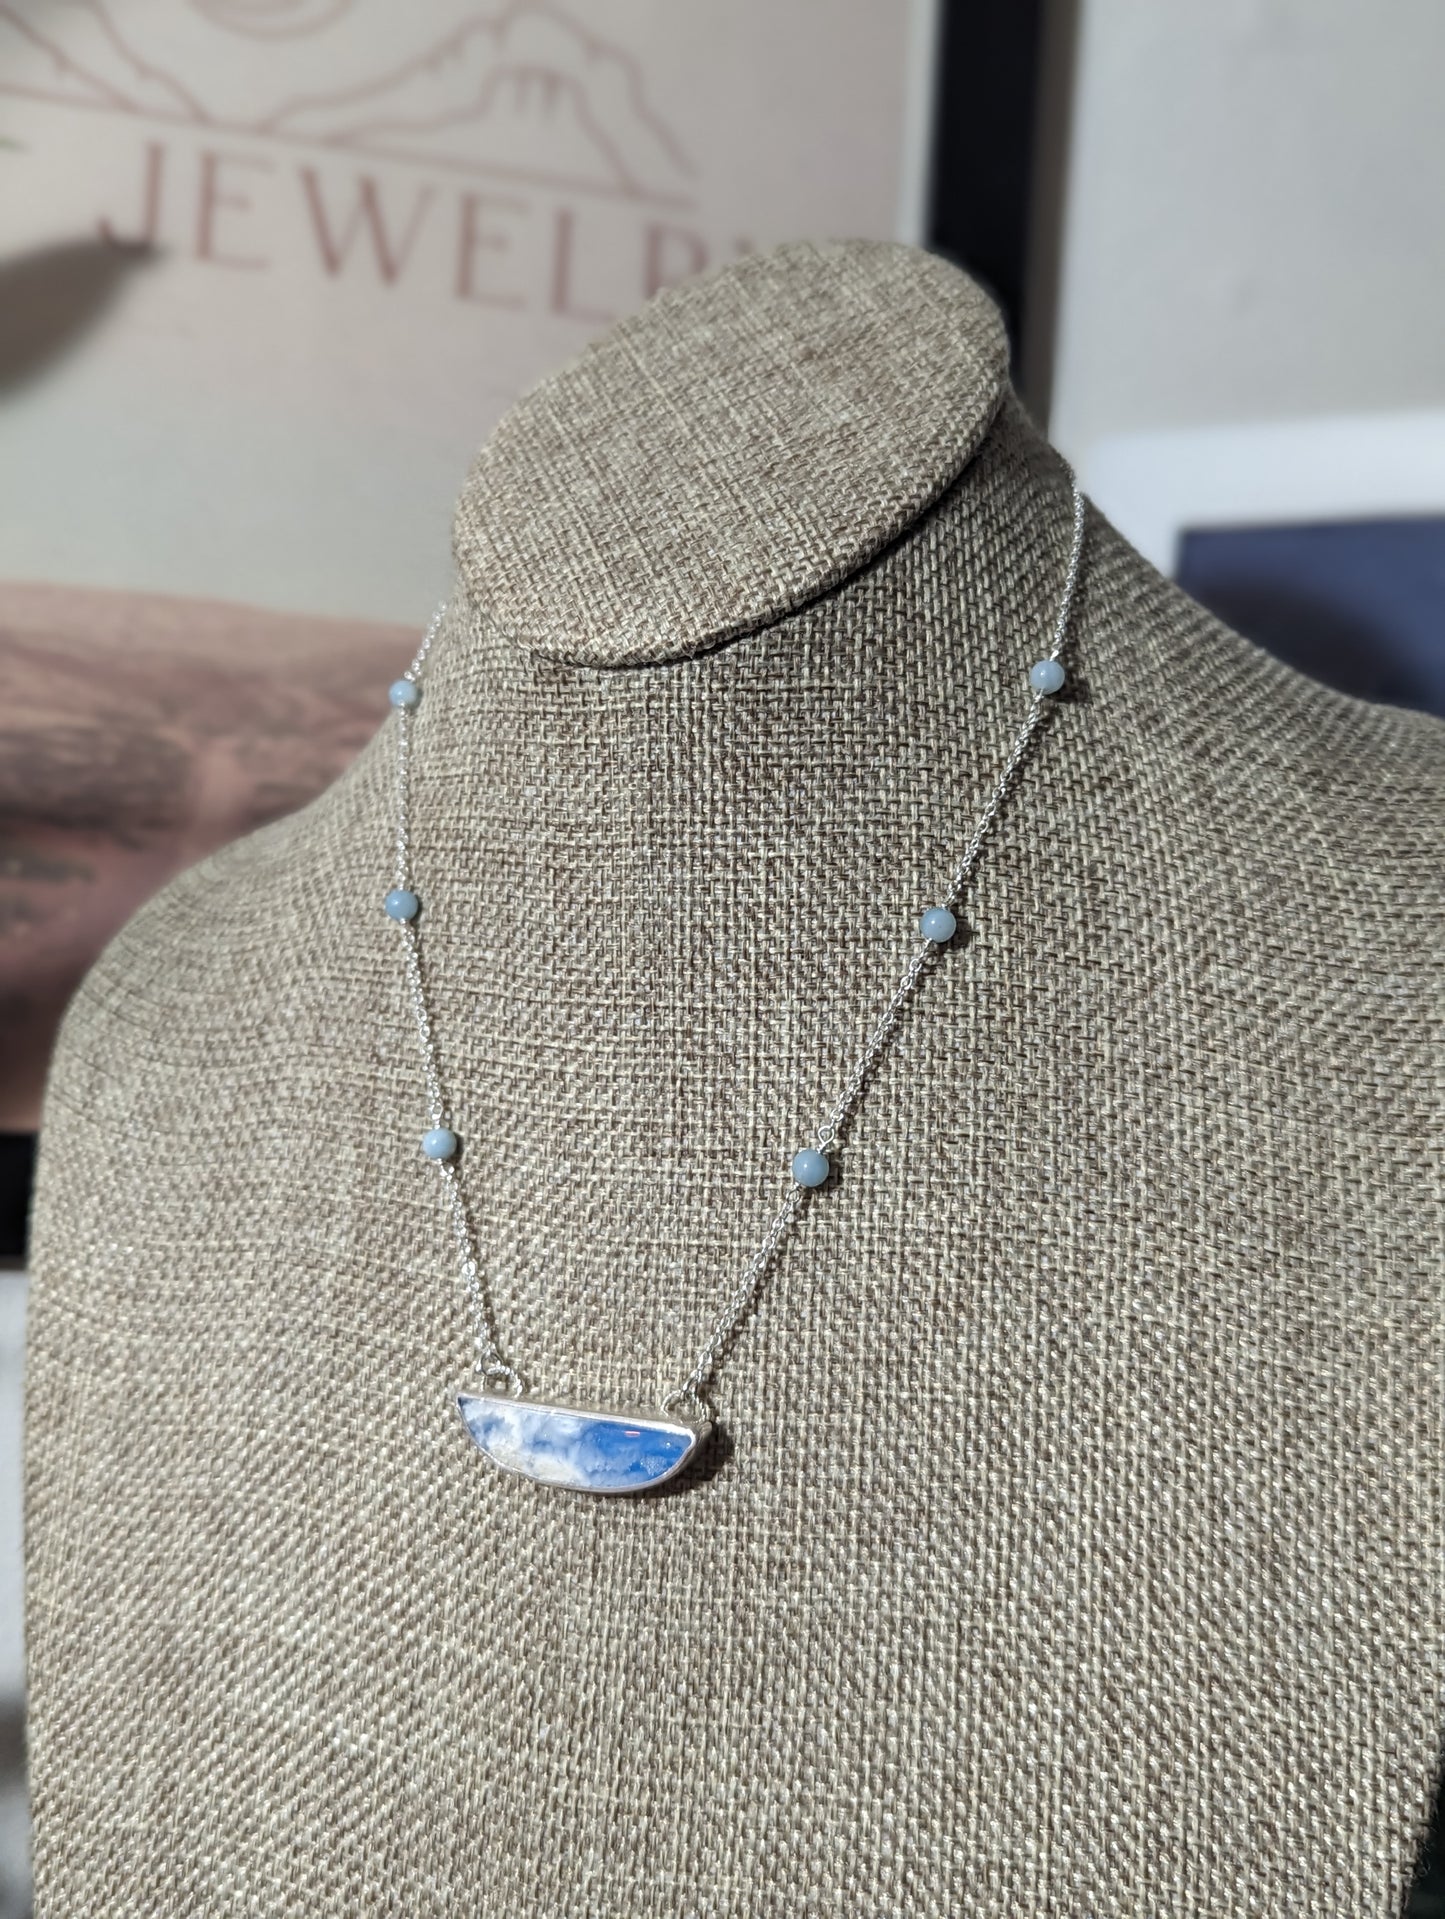 Blue Sky Half Moon Beaded Sterling Silver Necklace